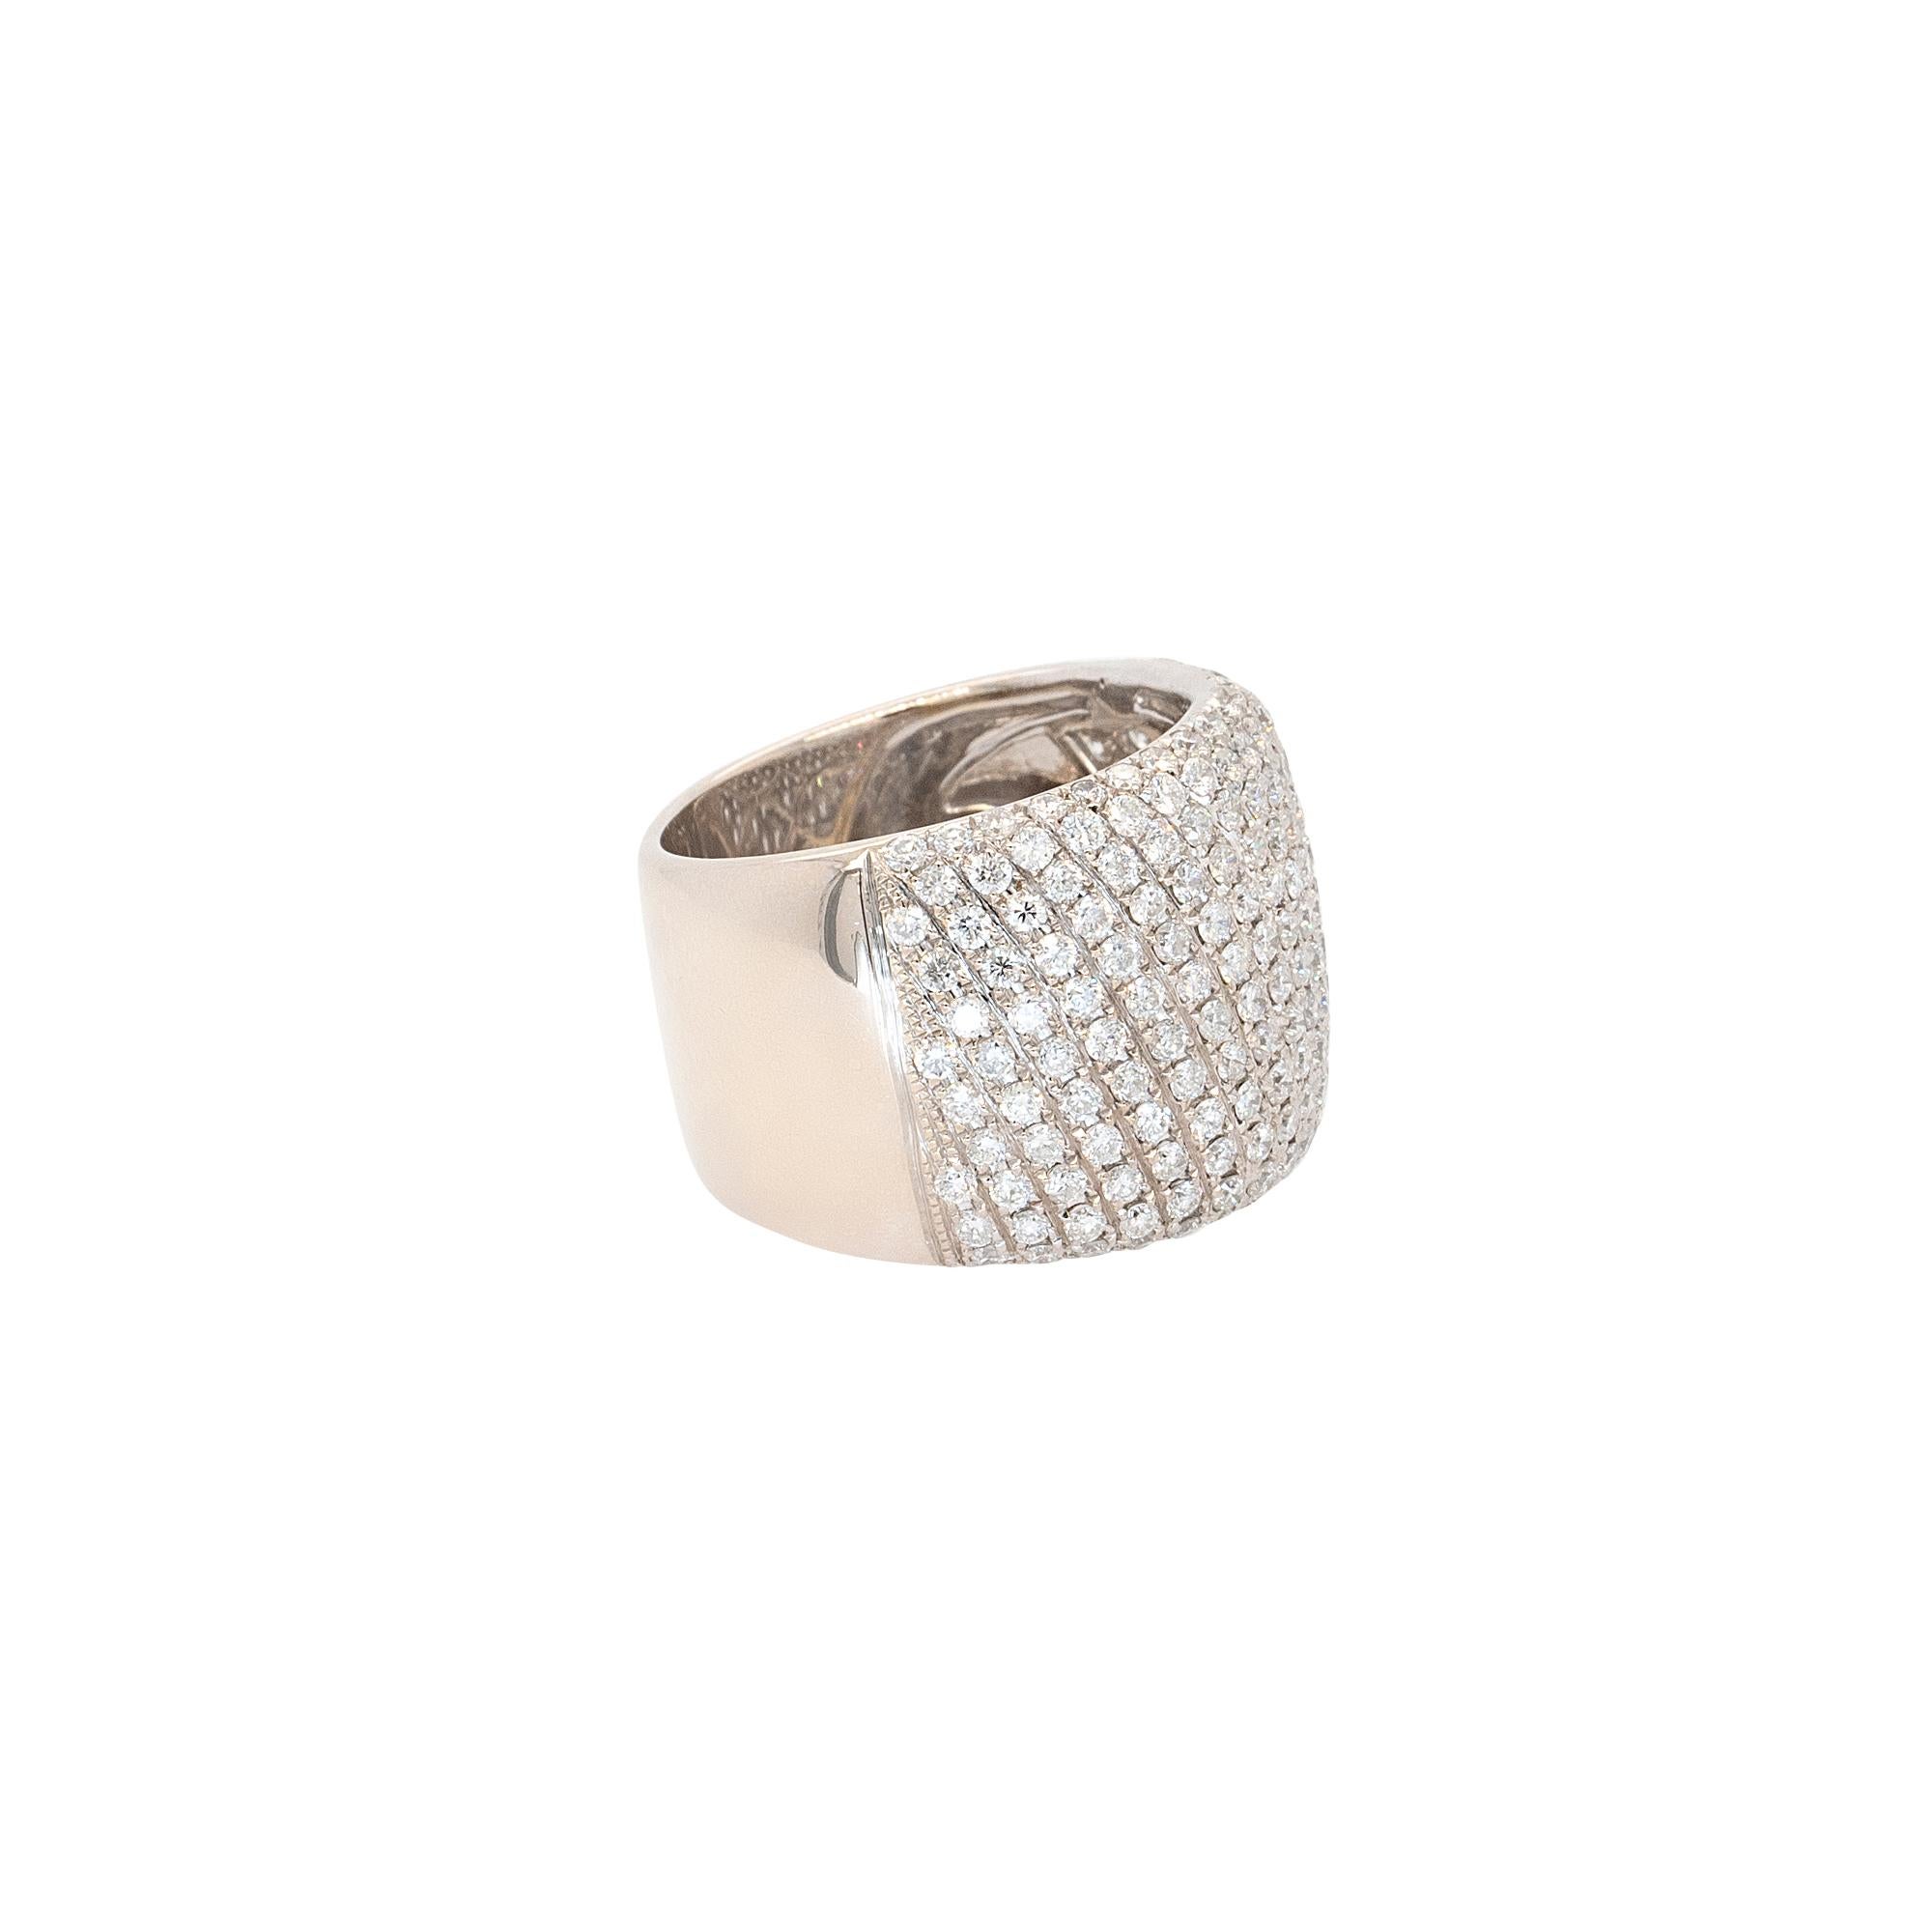 Diamond Details: 
2.35ctw Round Brilliant 
G/H Color SI Clarity
Ring Material: 18k White Gold
Ring Size: 7.5 (can be sized)
Total Weight: 12.75g (8.19dwt)
This item comes with a presentation box!
SKU: R6314

Adorned in the understated opulence of